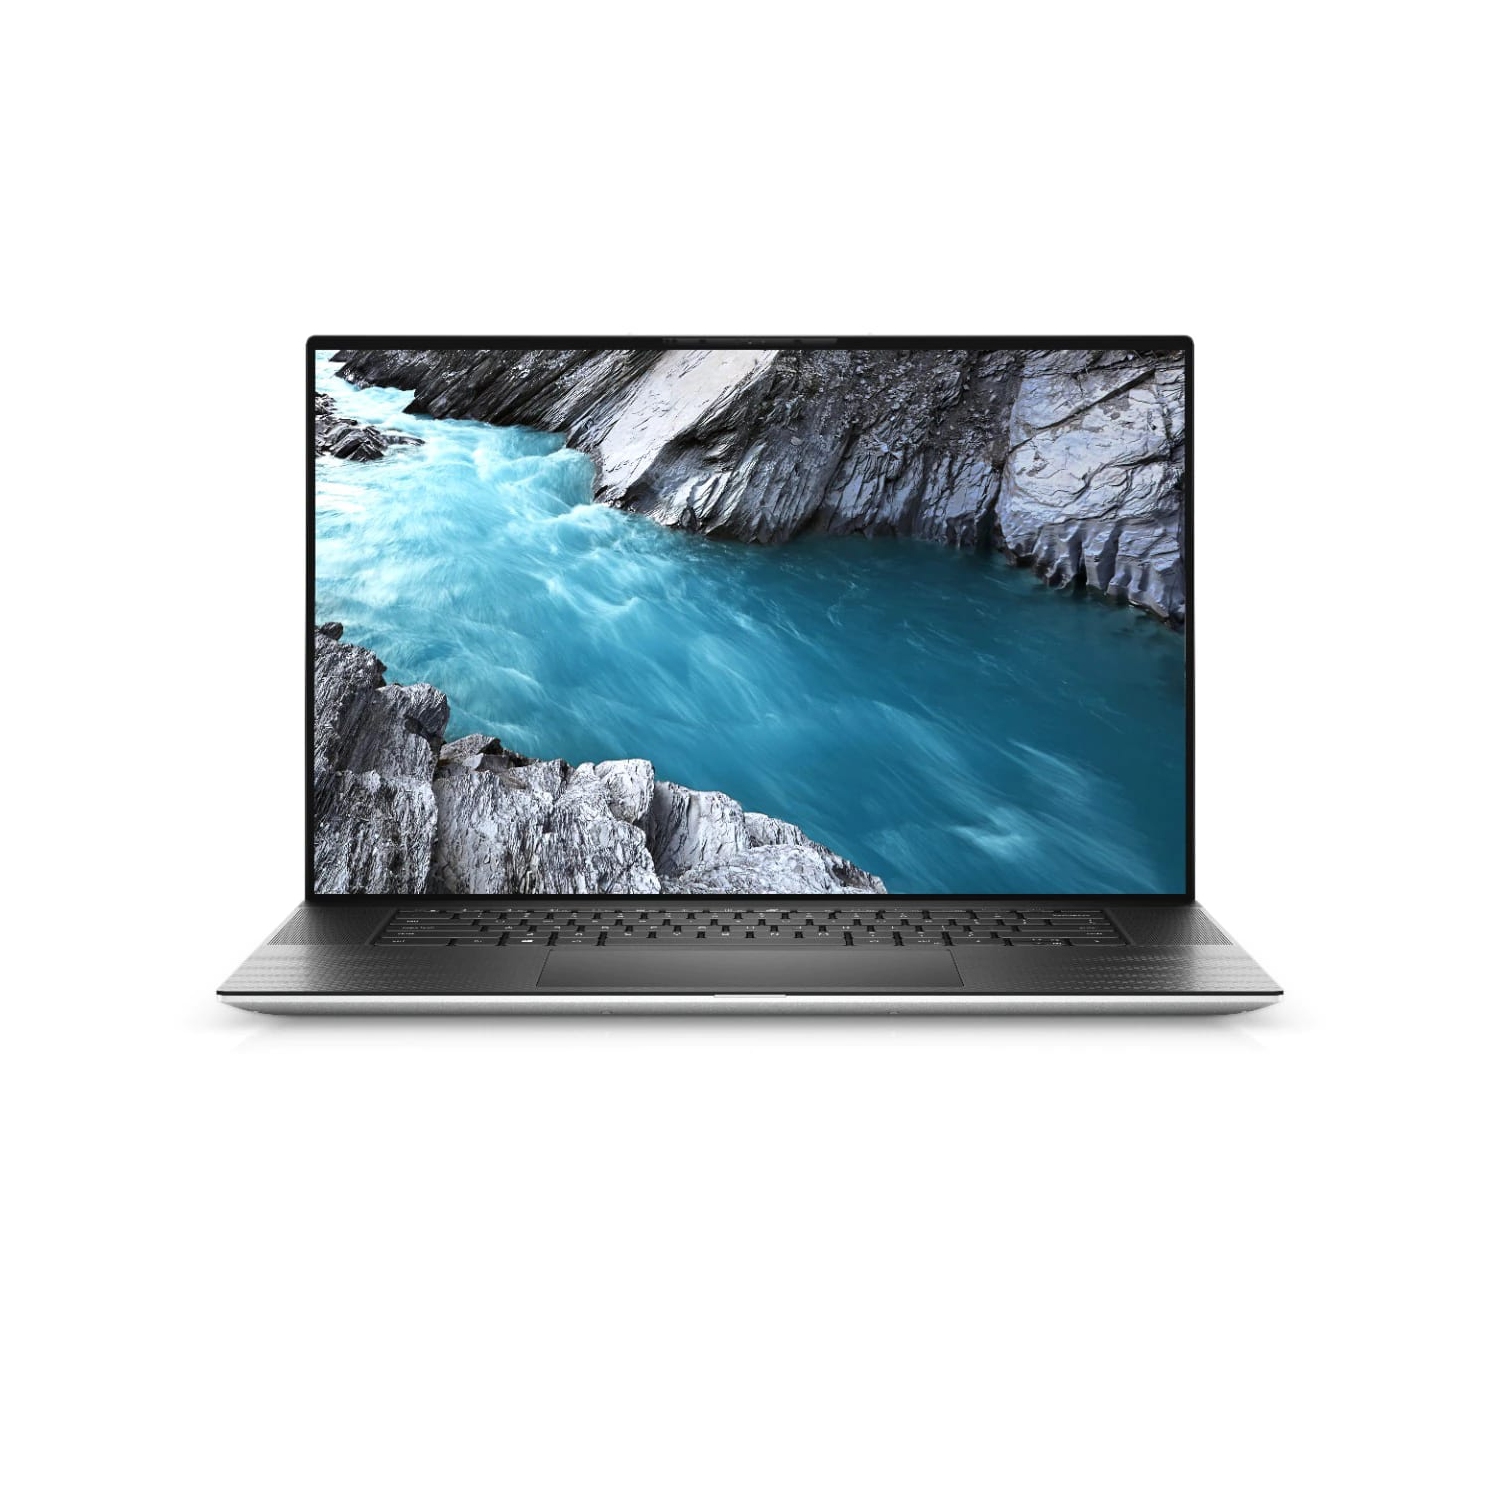 Refurbished (Excellent) - Dell XPS 17 9700 Laptop (2020) | 17" FHD+ | Core i9 - 512GB SSD - 16GB RAM - RTX 2060 | 8 Cores @ 5.3 GHz - 10th Gen CPU Certified Refurbished